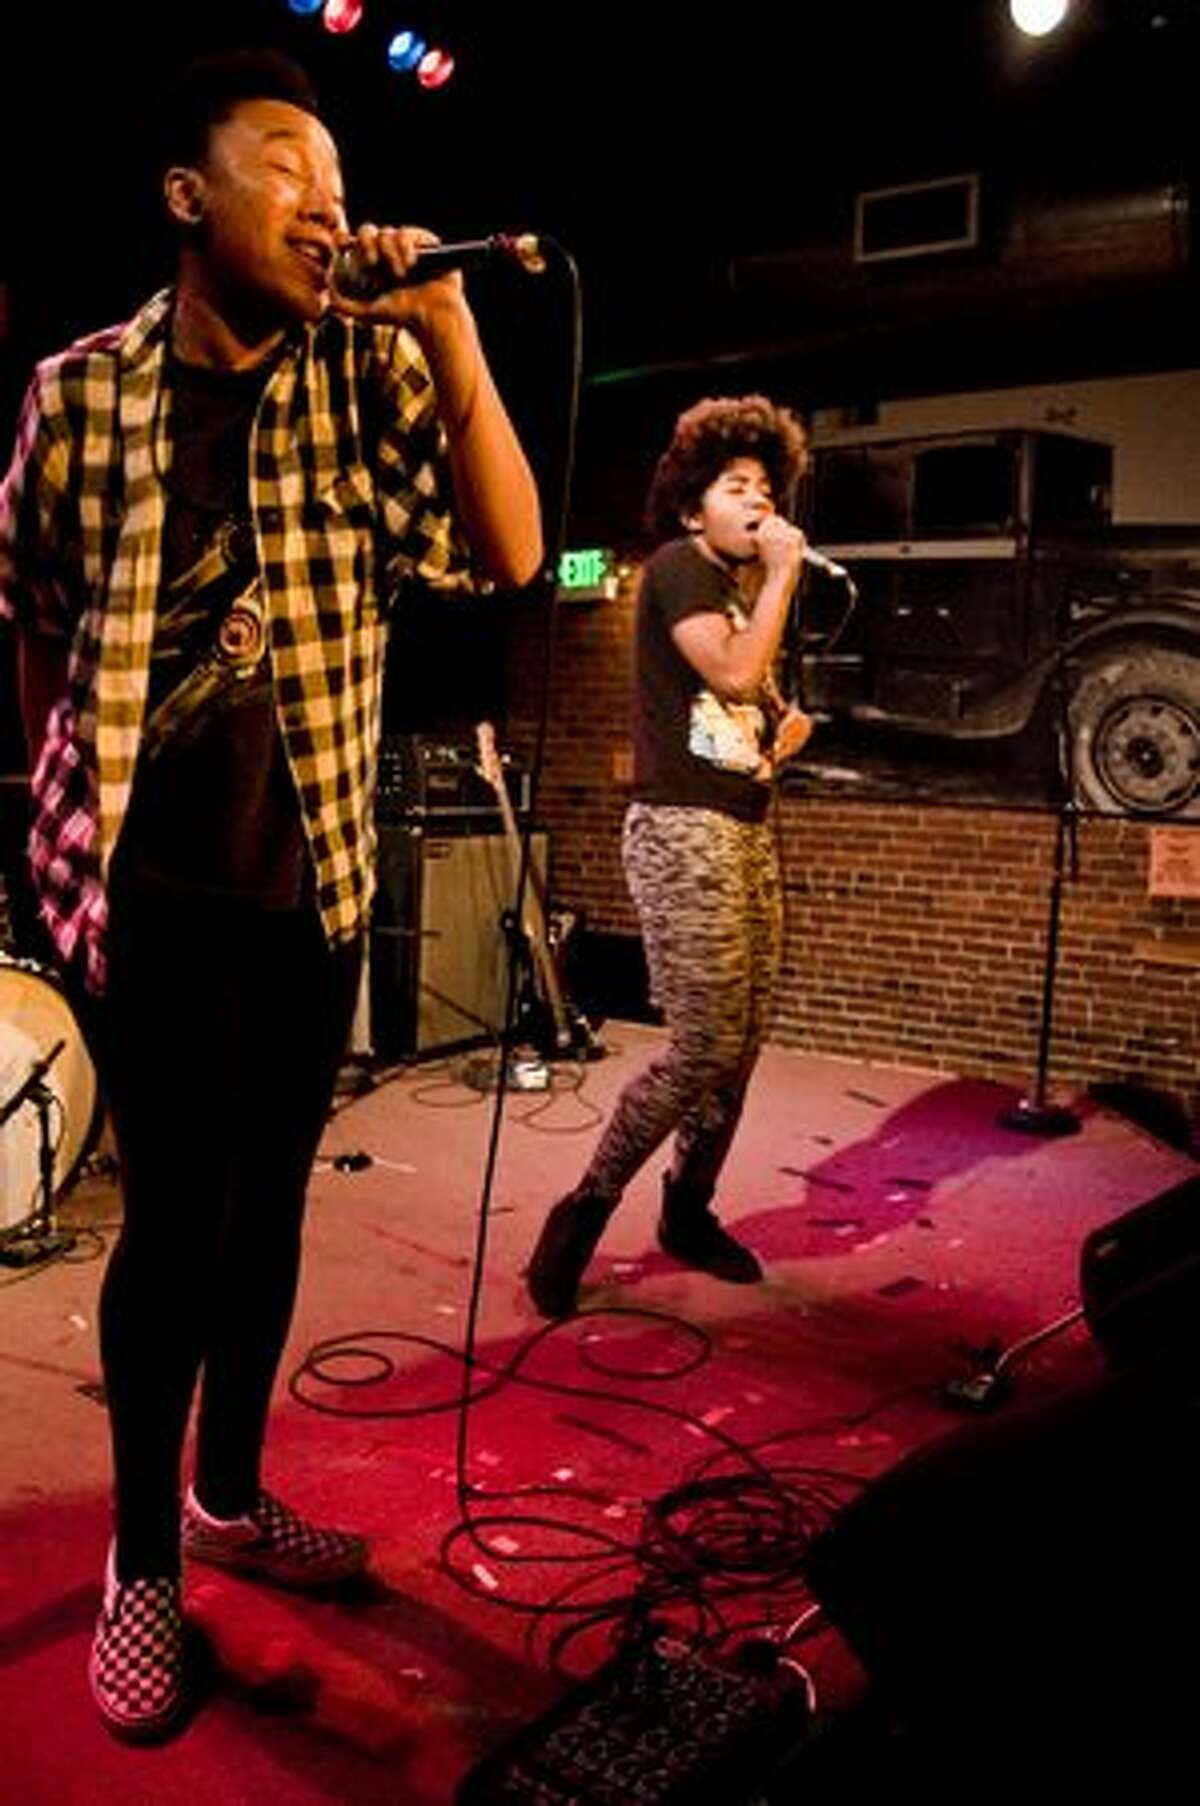 THEESatisfaction perfroming at the SXSW sendoff party at the Tractor. (photo courtesy of Nate Watters)